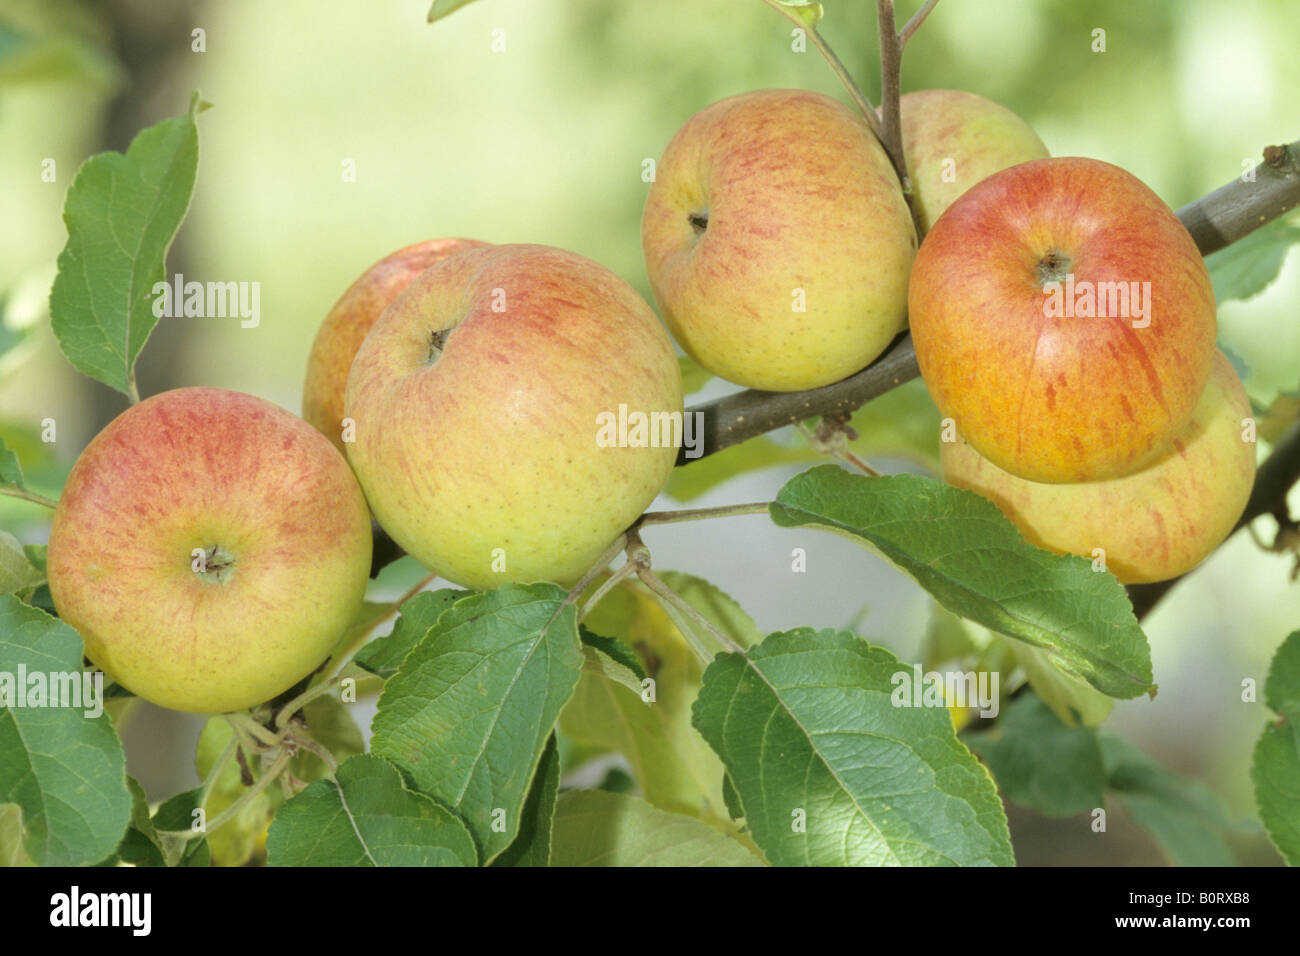 Domestic Apple Malus domestica variety Berlepsch ripe apples on a twig studio picture Stock Photo